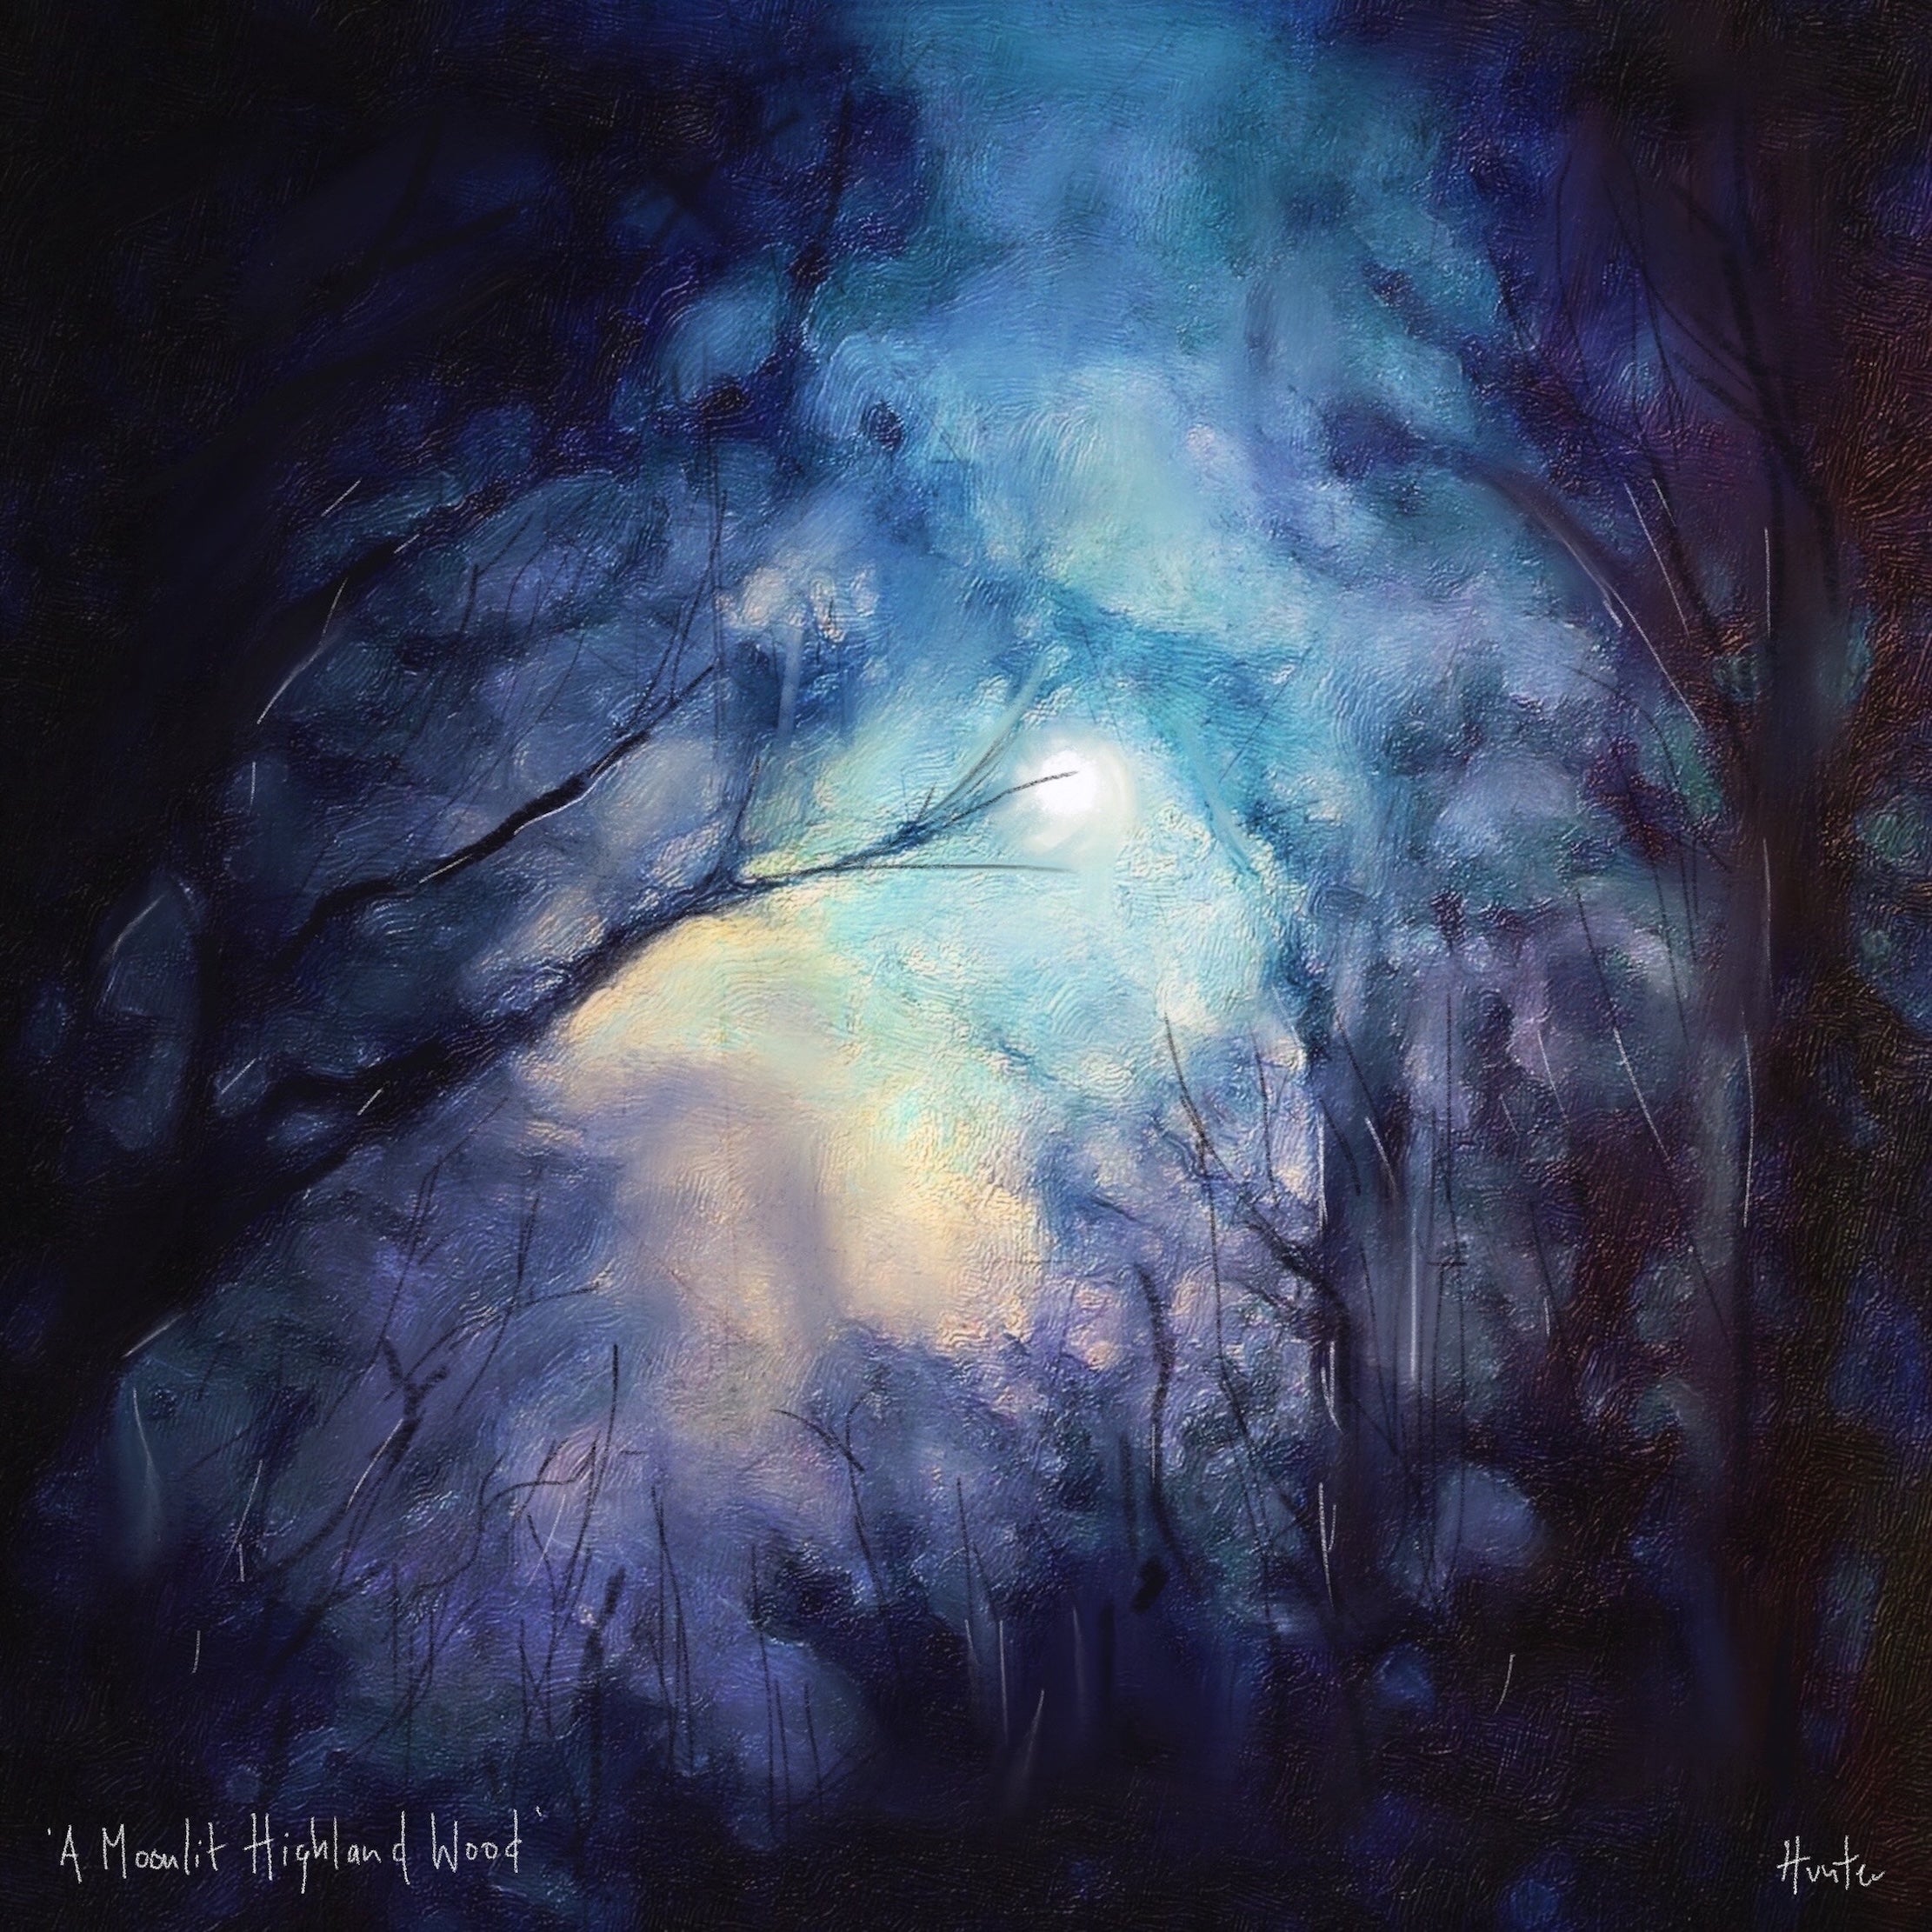 A Moonlit Highland Wood | Scotland In Your Pocket Art Print-Scotland In Your Pocket Framed Prints-Scottish Highlands & Lowlands Art Gallery-Paintings, Prints, Homeware, Art Gifts From Scotland By Scottish Artist Kevin Hunter